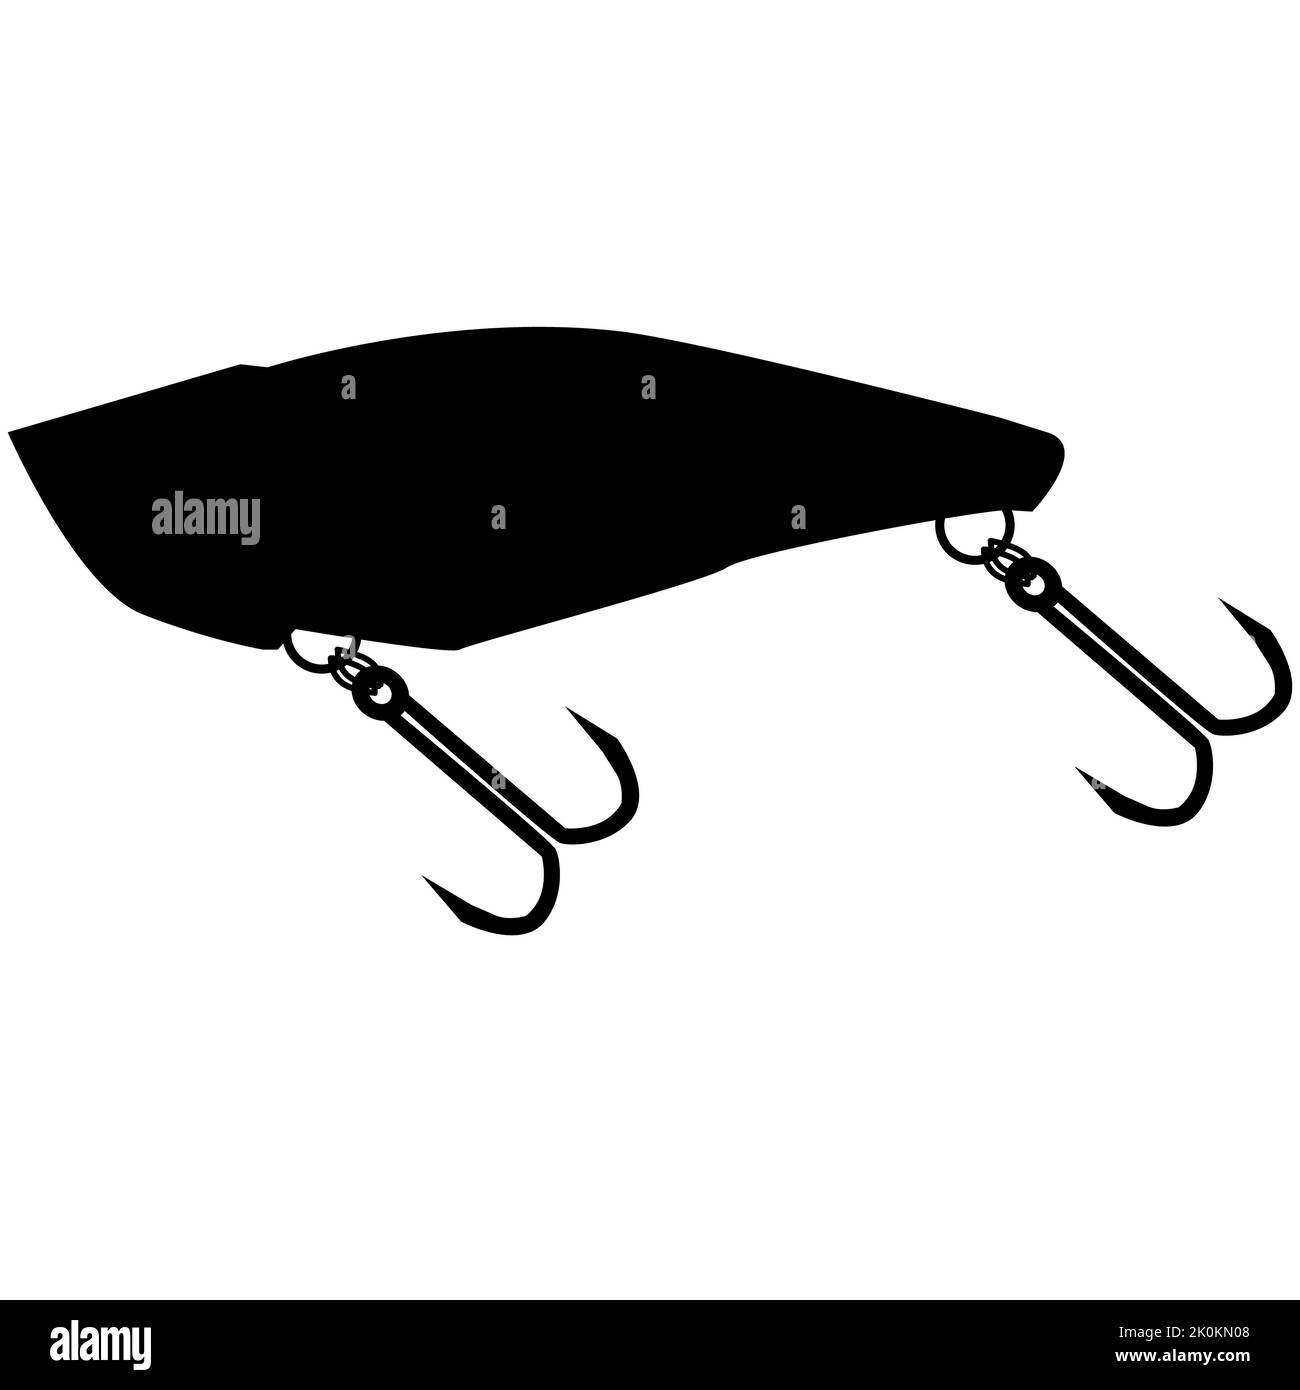 Fishing tackle illustration Black and White Stock Photos & Images - Page 2  - Alamy